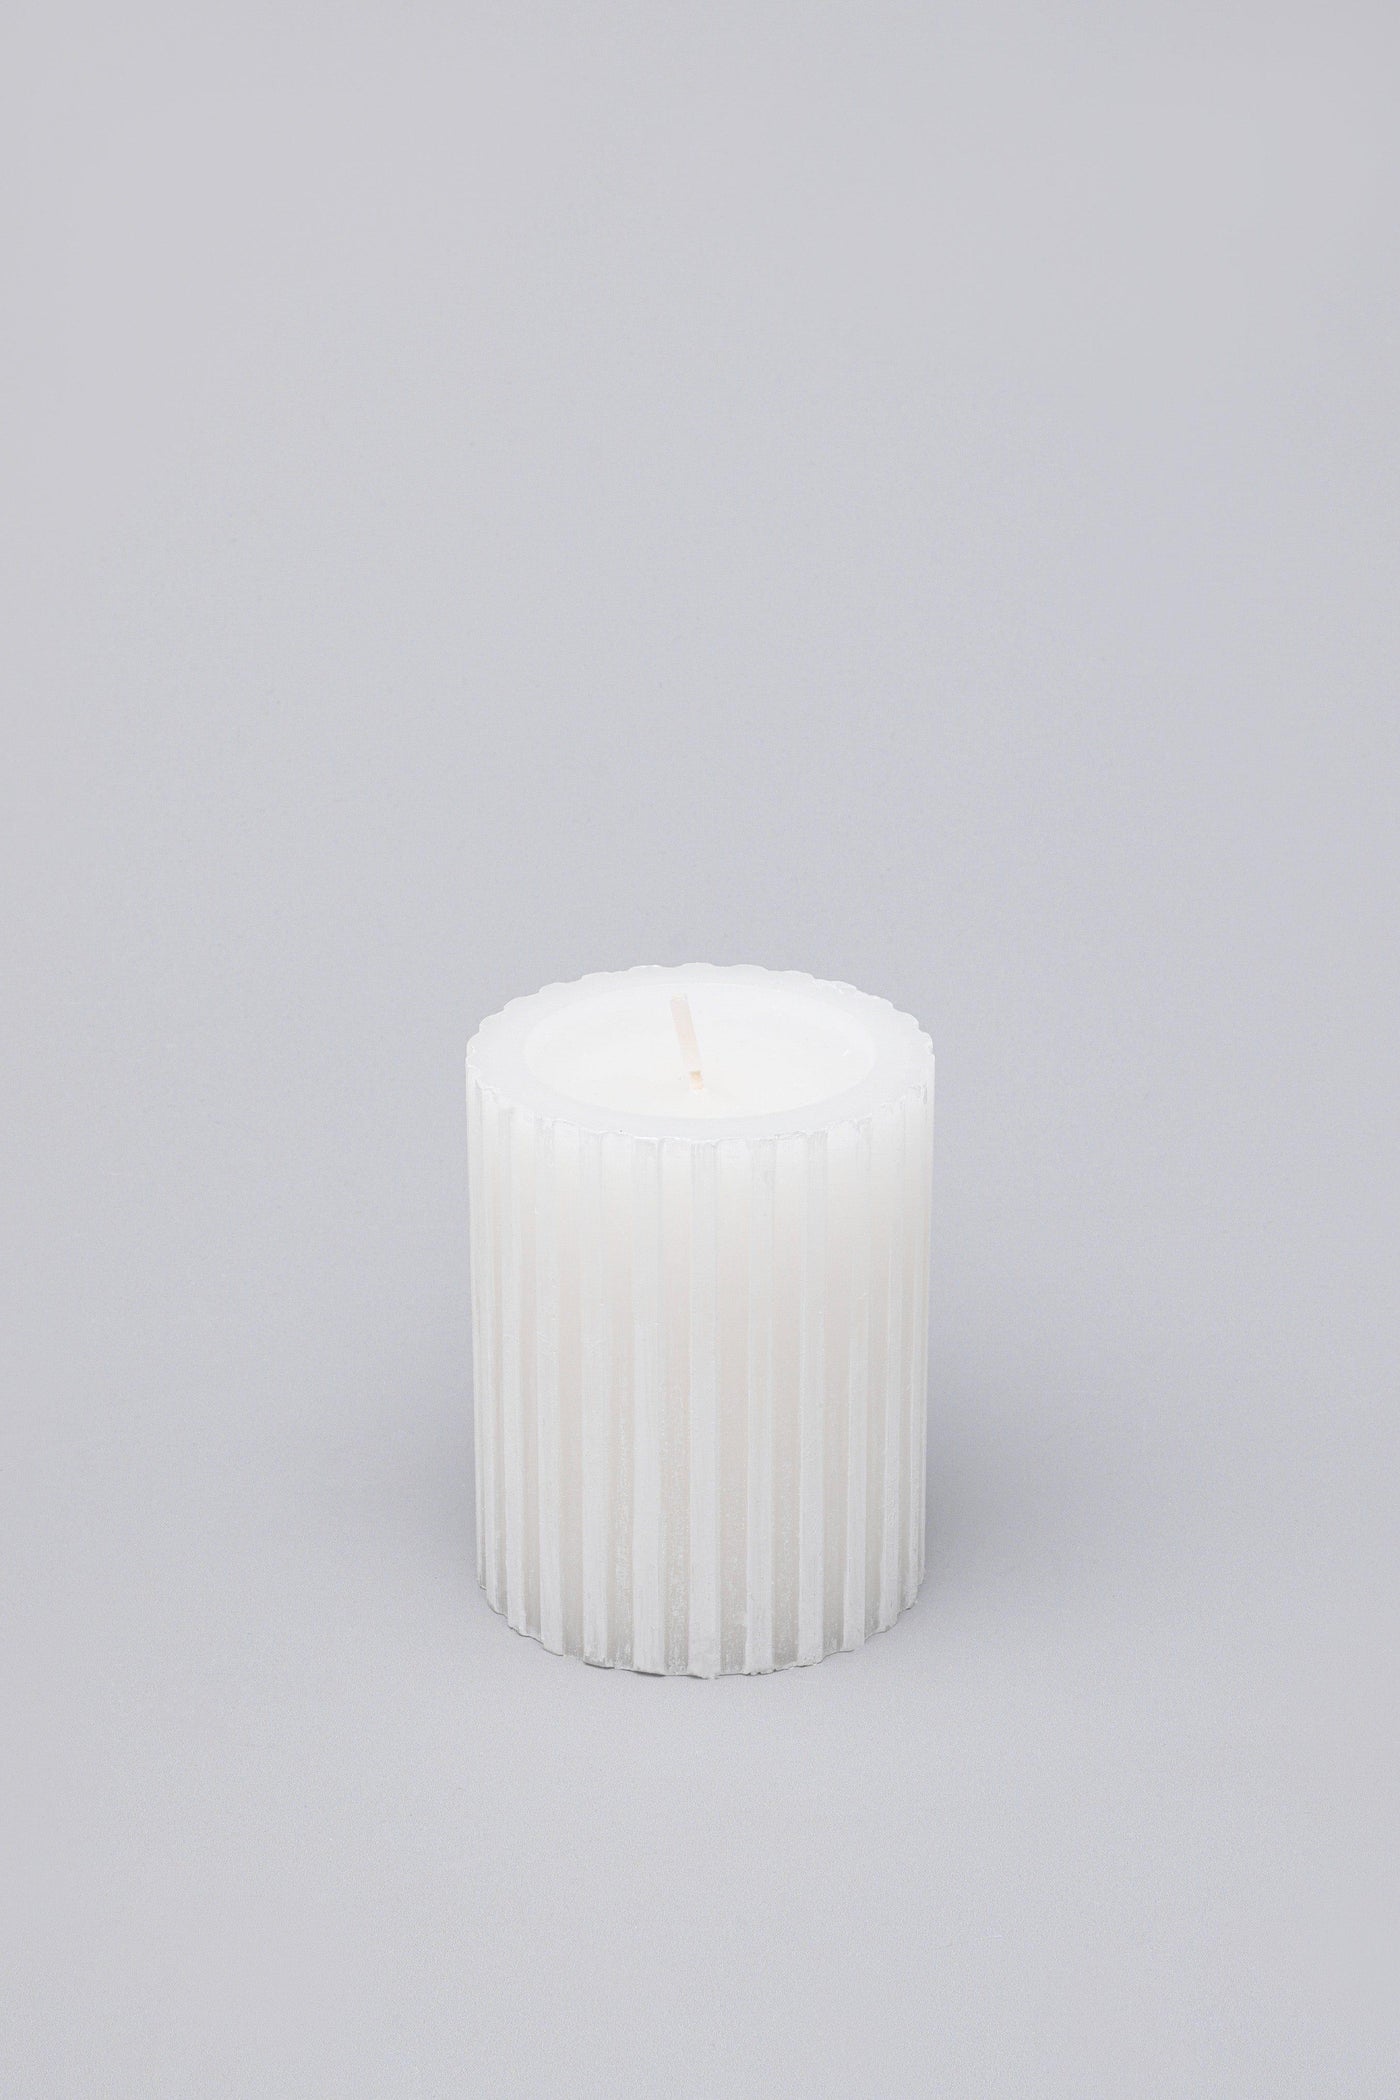 G Decor Candles White / Medium pillar Scented Grooved White Frangipani, Perfect for Meditation, Pillar Candle